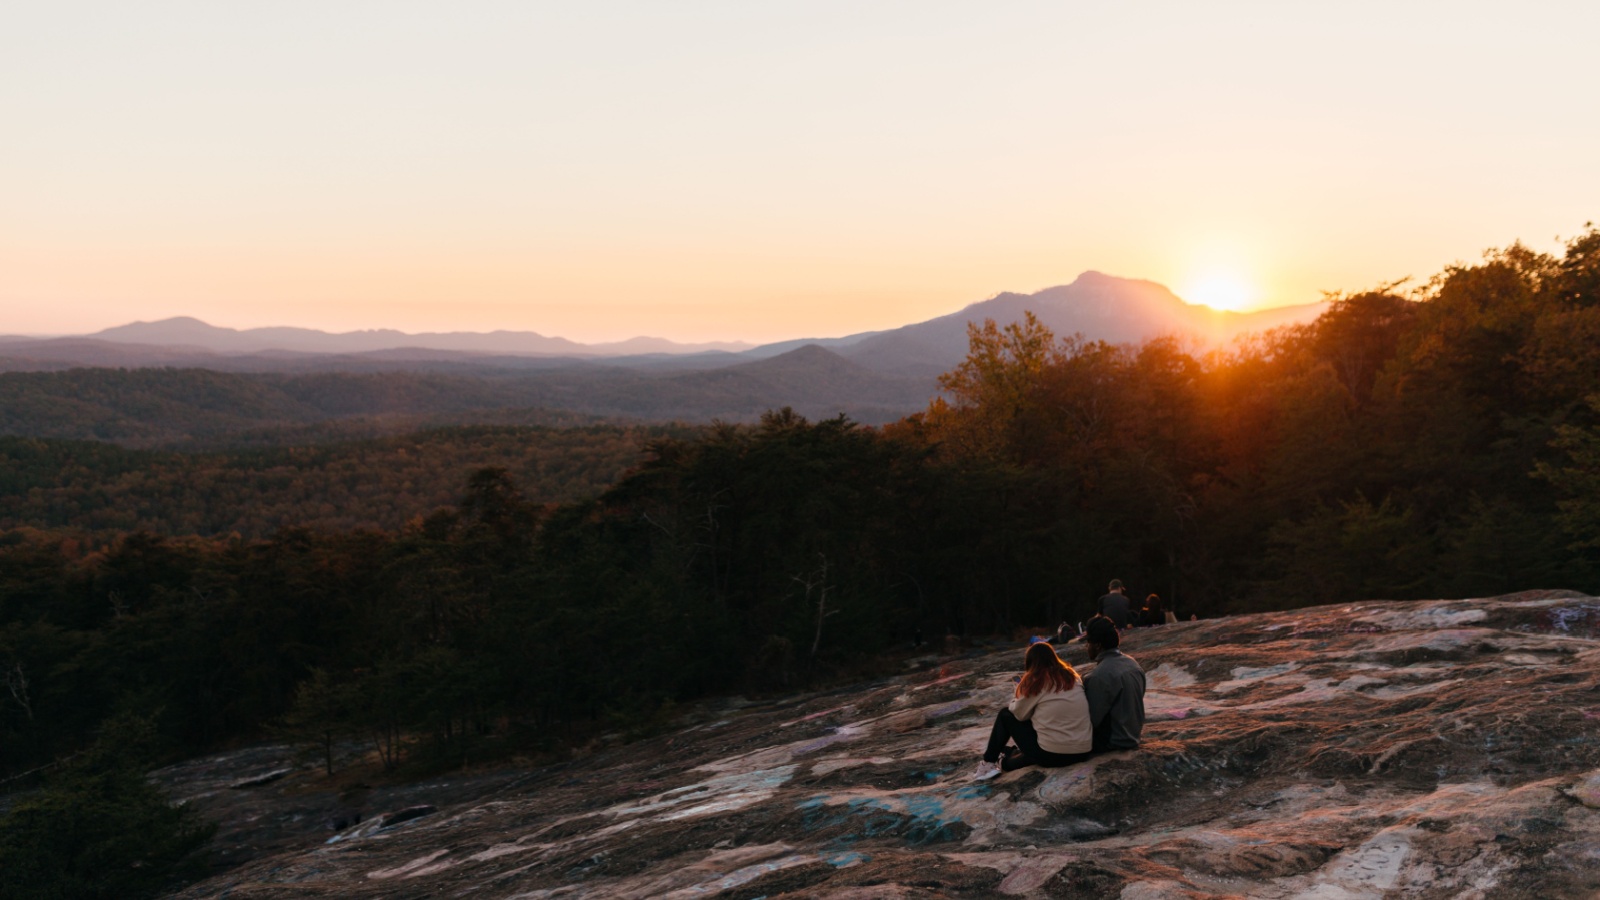 image credit: MILA PARH/Shutterstock <p>Perched on the edge of Cheaha Mountain, Bald Rock offers panoramic views of the Talladega National Forest. The boardwalk to the overlook makes it accessible to all visitors, providing a stunning vantage point to watch the sunset. The rock’s sheer expanse and the sweeping landscape below make it a breathtaking spot.</p>